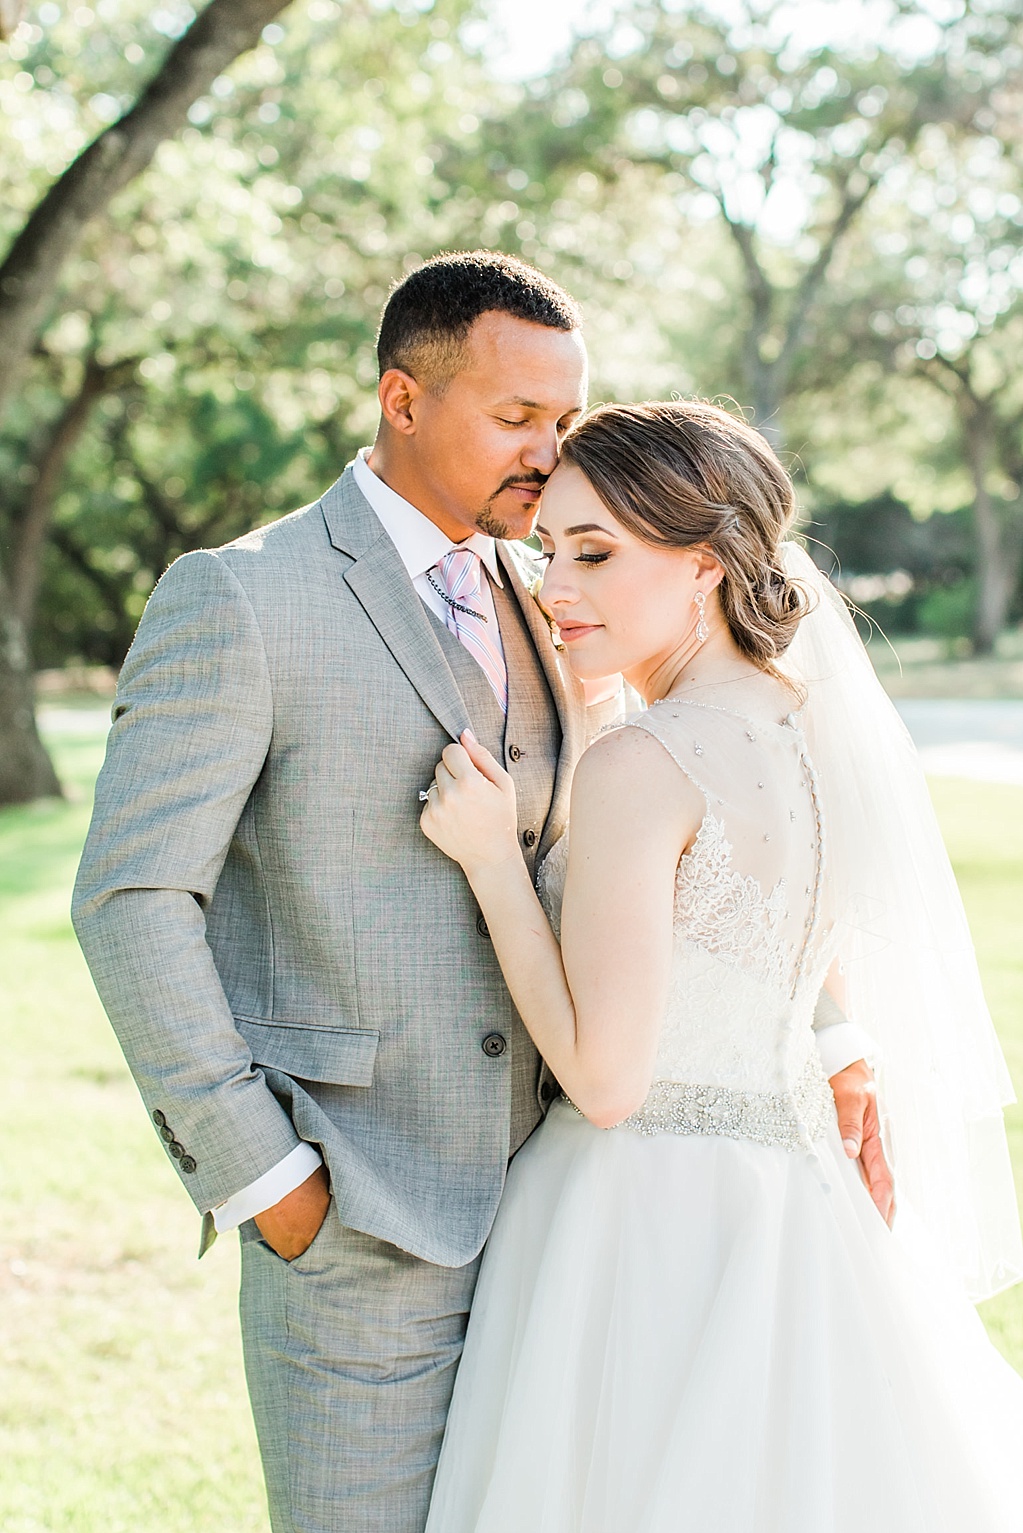 A Blush Vintage Summer Wedding at The Chandelier of Gruene in New Braunfels Texas by Allison Jeffers Photography 0116